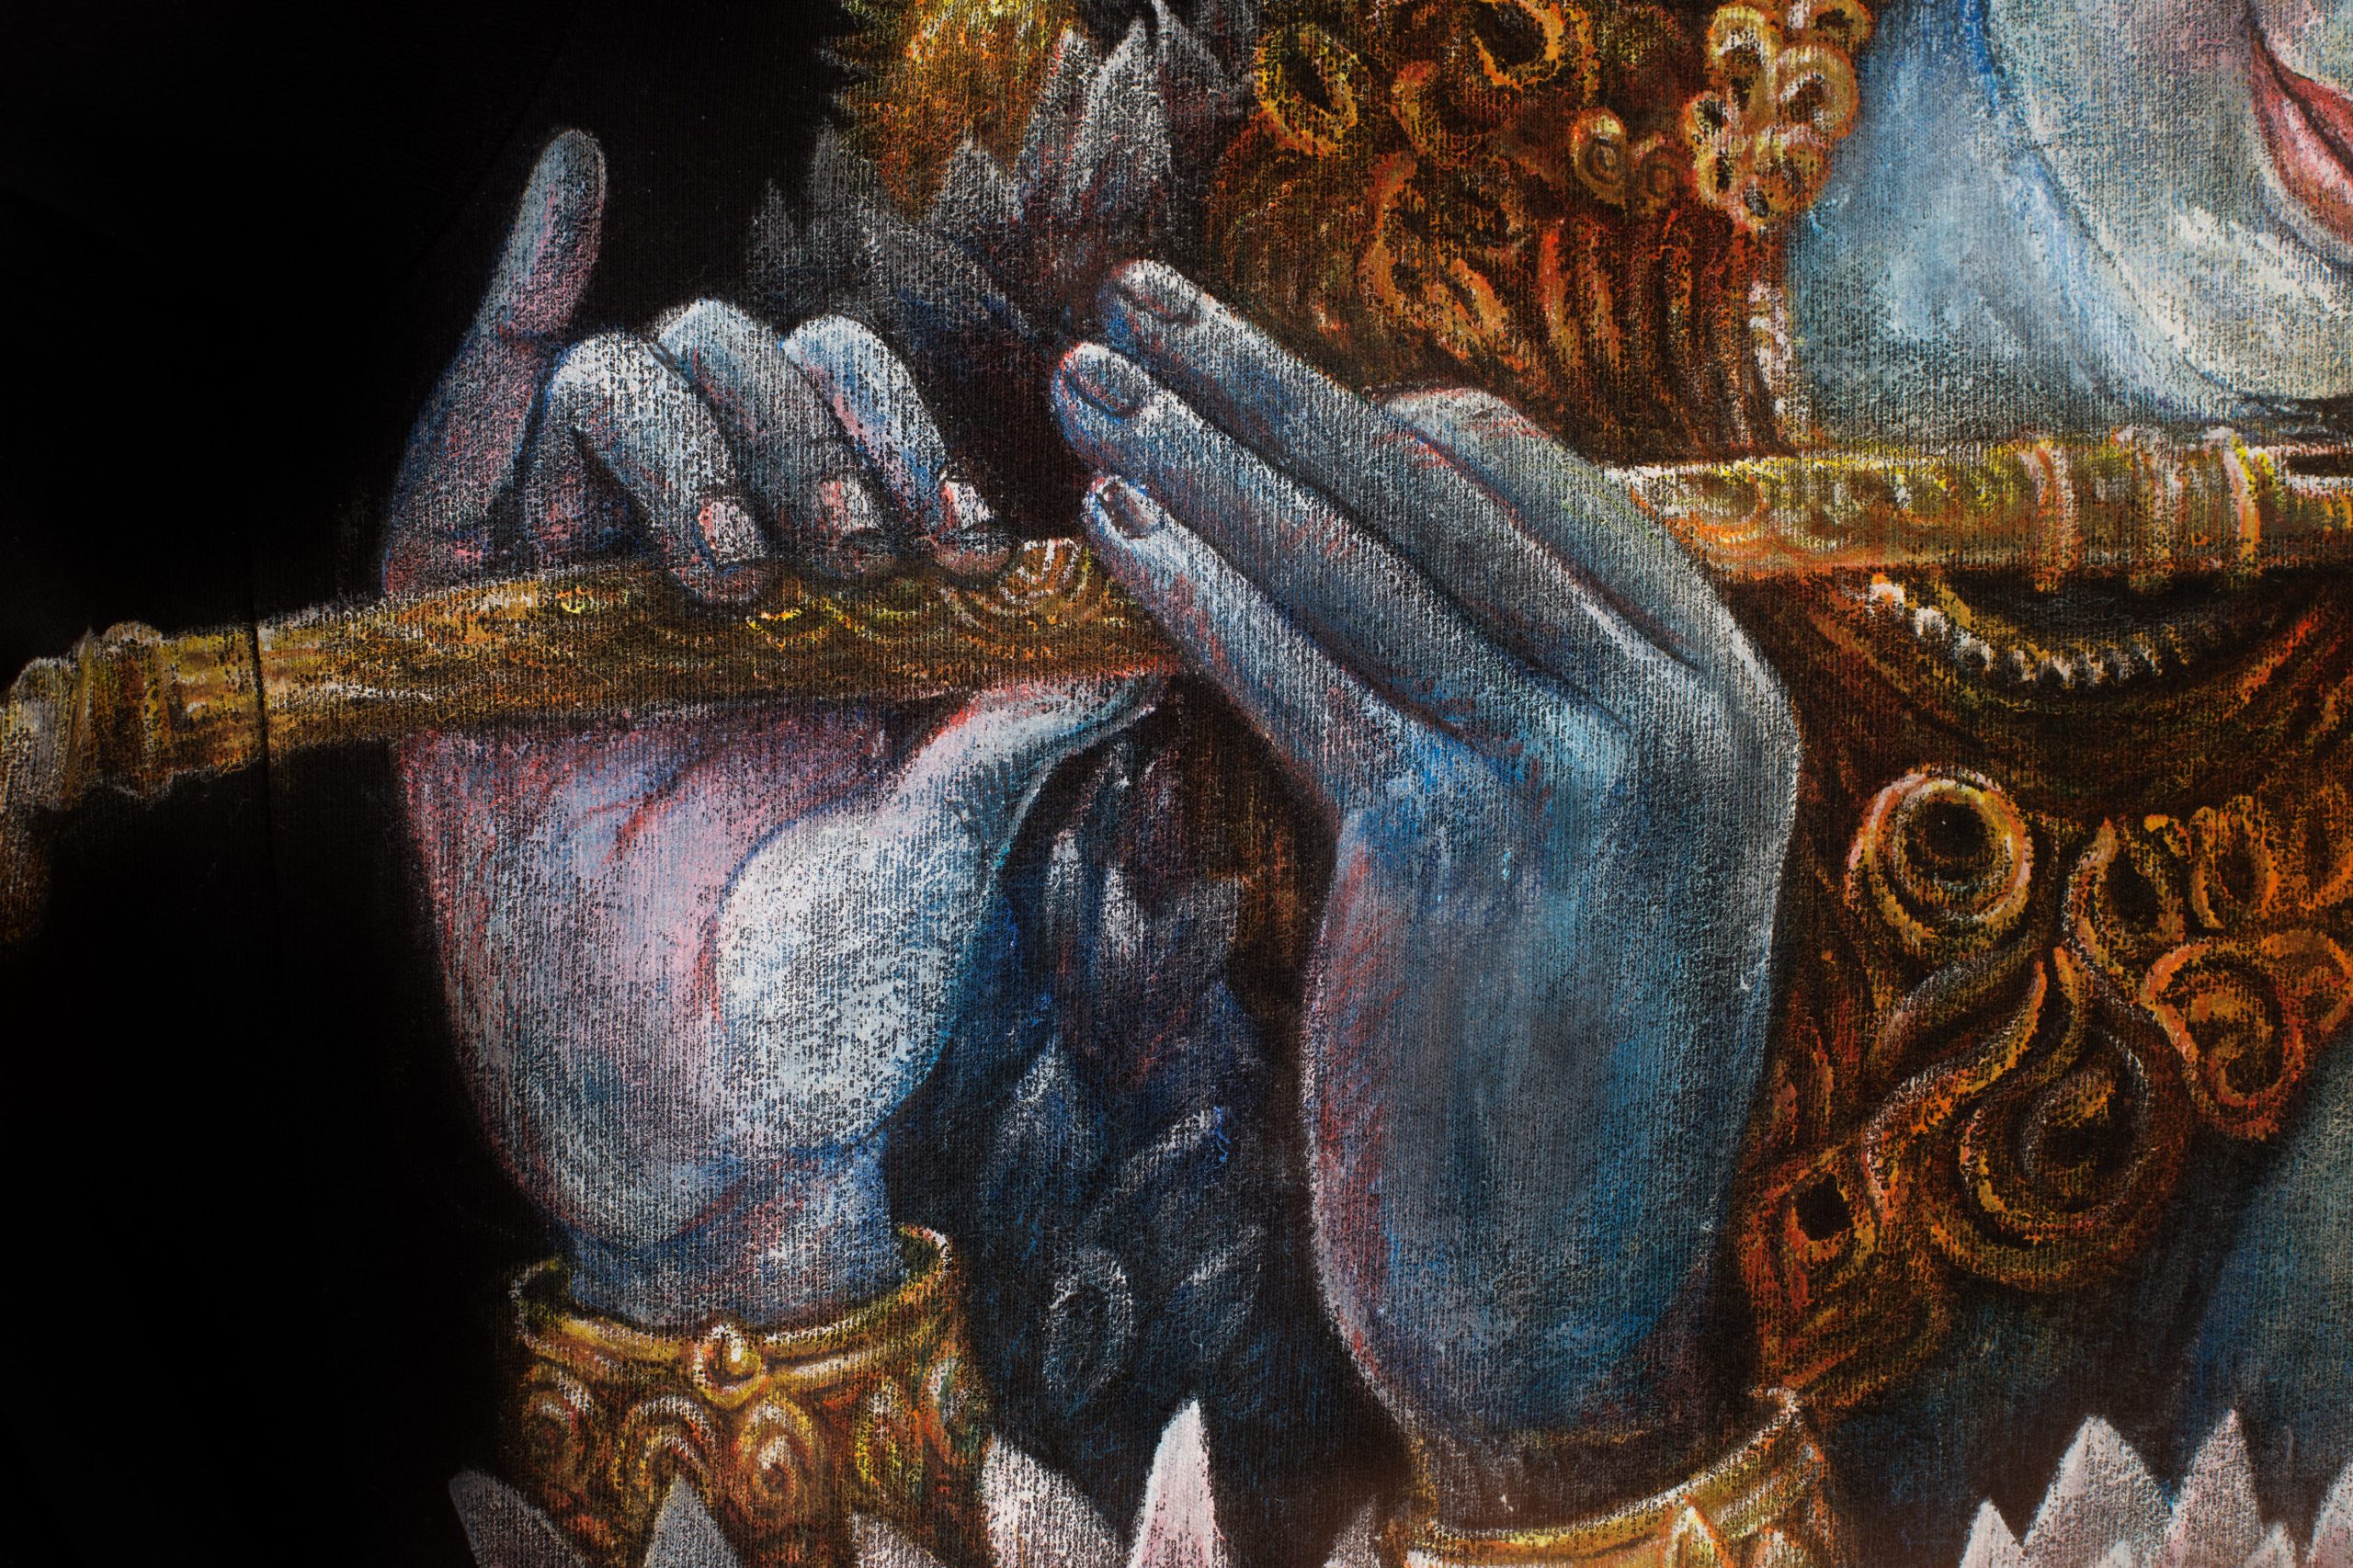 hands of lord krishna playing flute, detail with lotus pattern